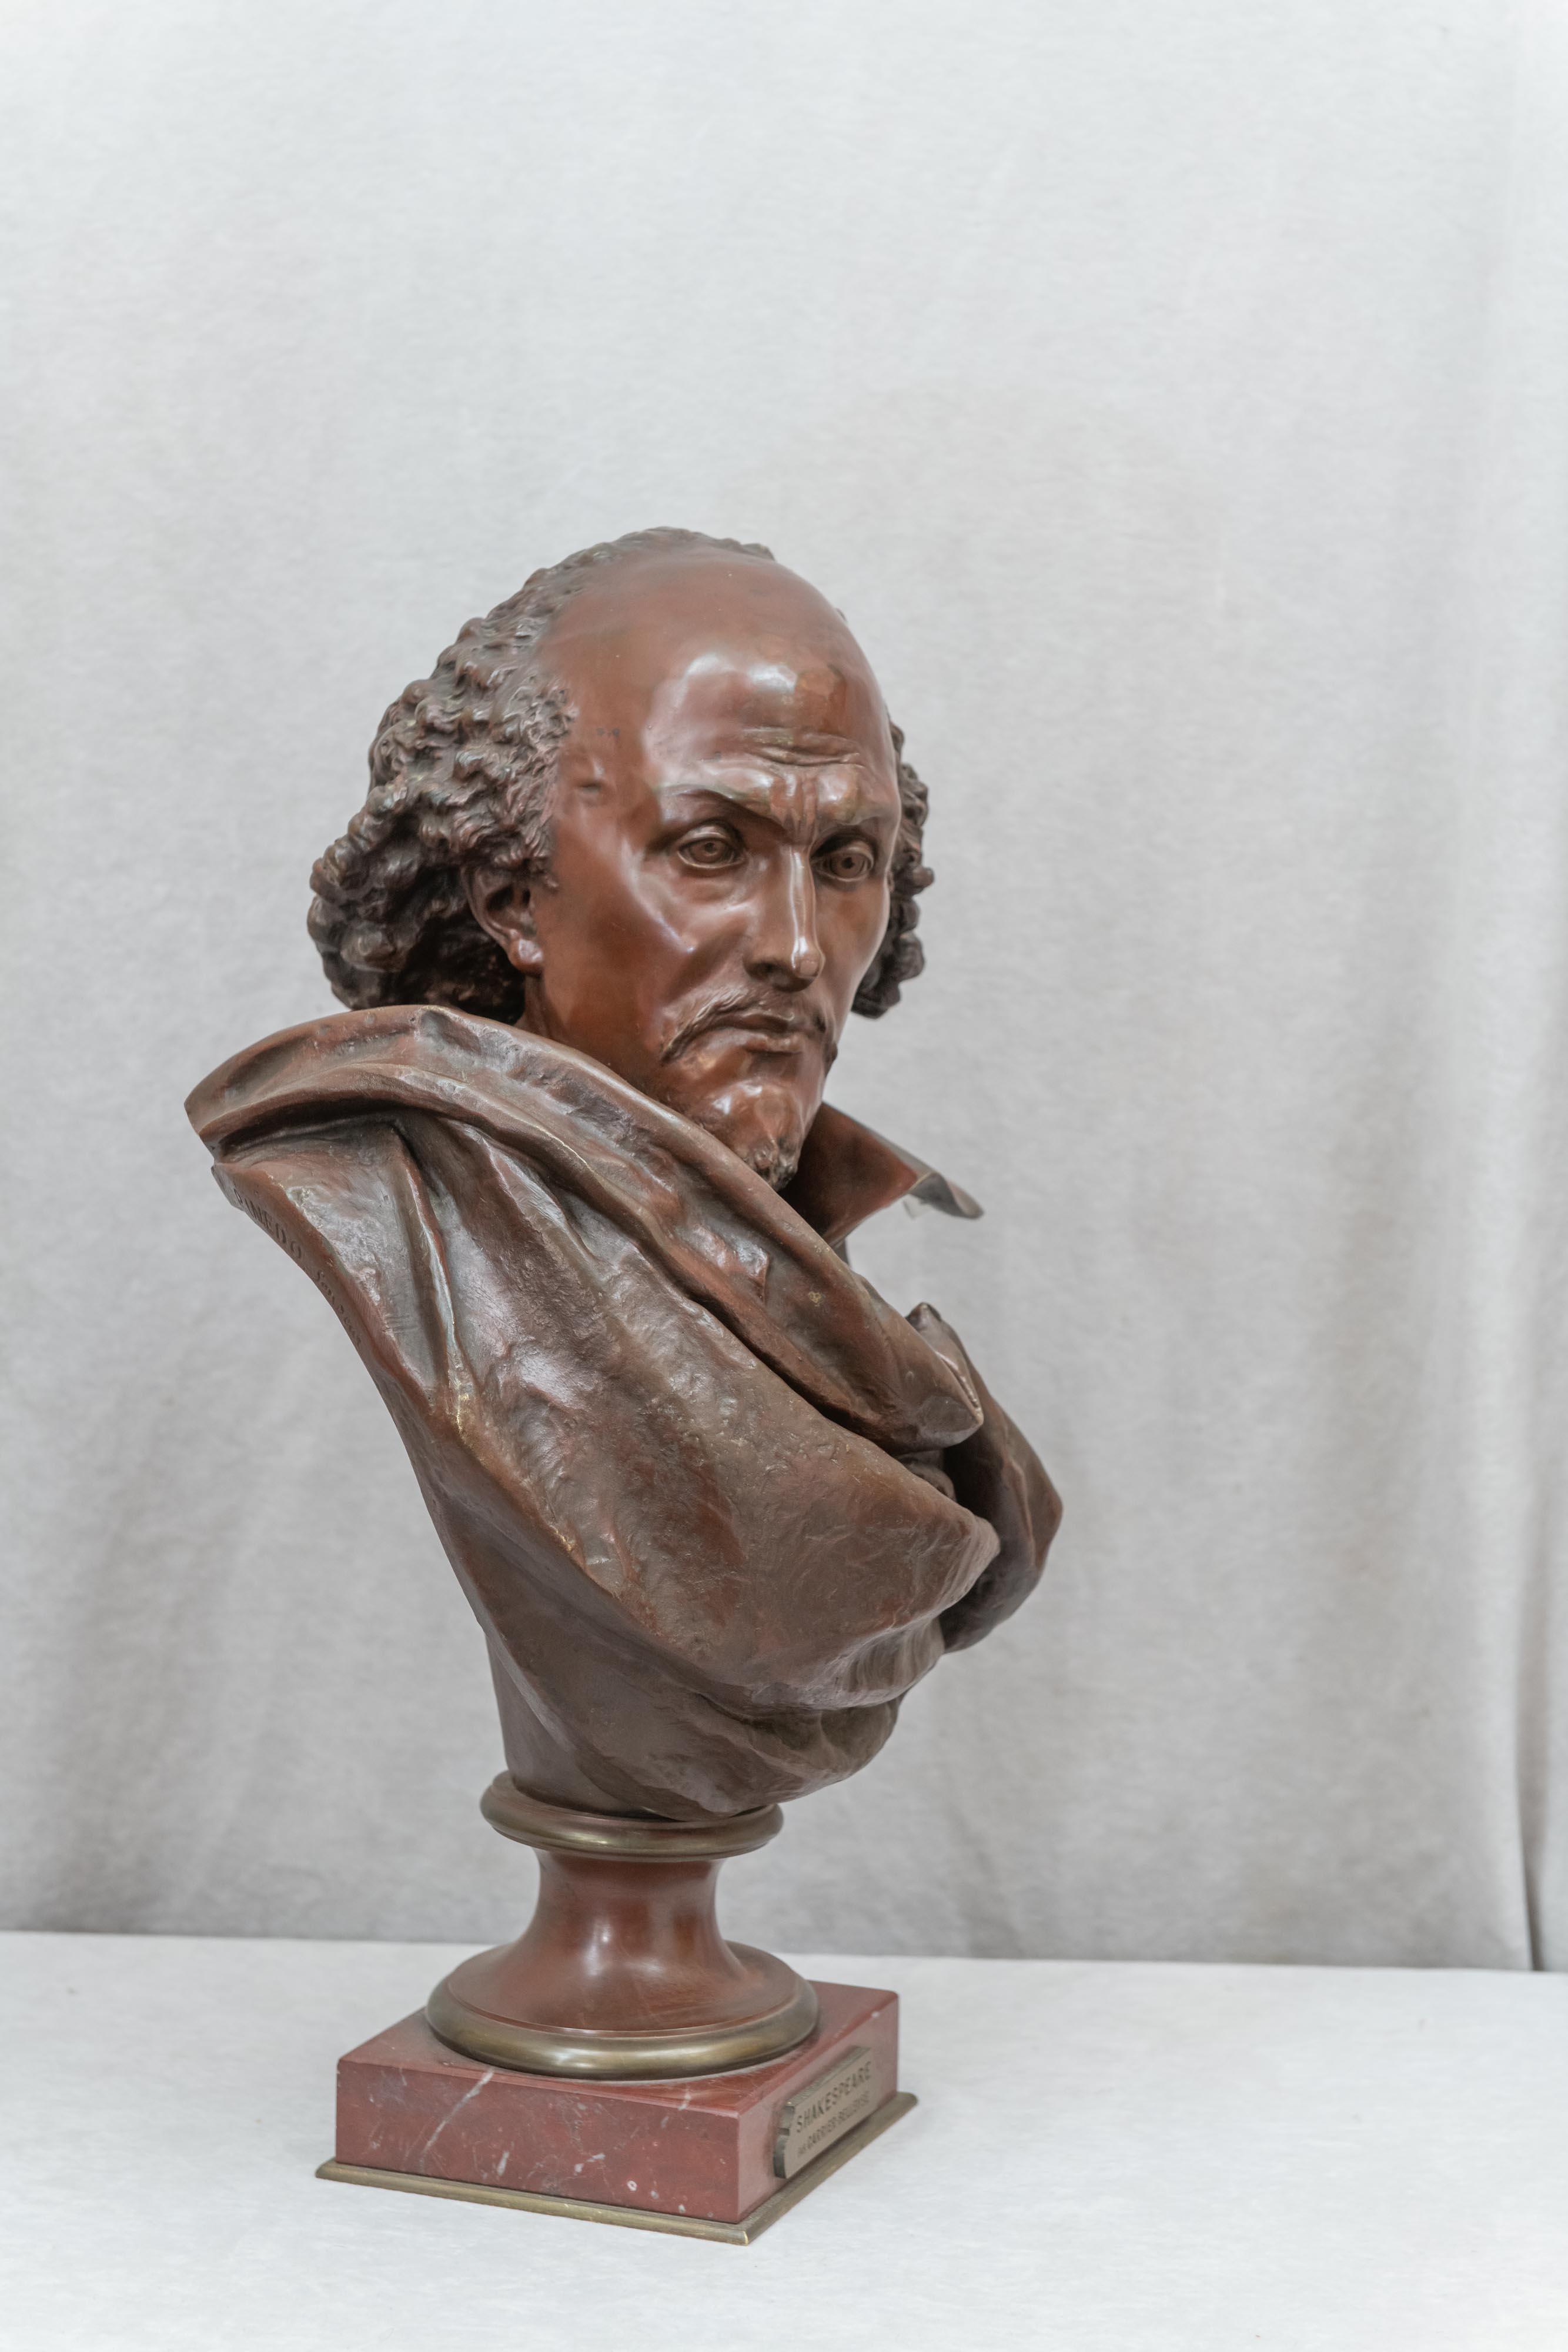 Patinated Bronze Bust of Wm. Shakespeare, French, Late 19th Century by Carrier Belleuse